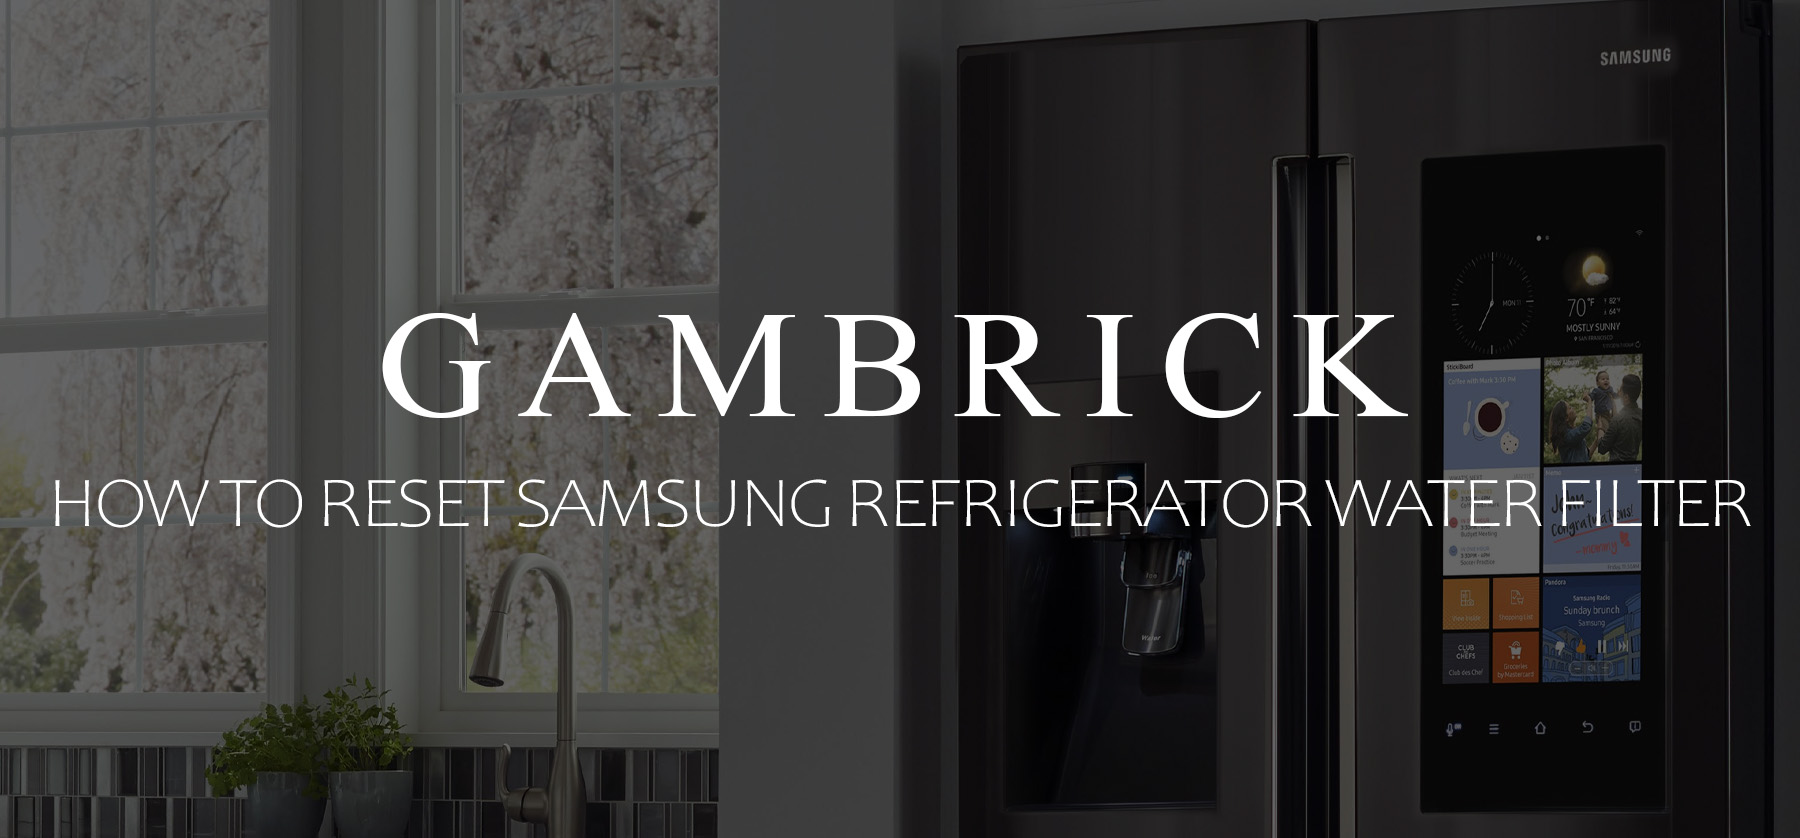 how to reset Samsung refrigerator water filter banner 1.0